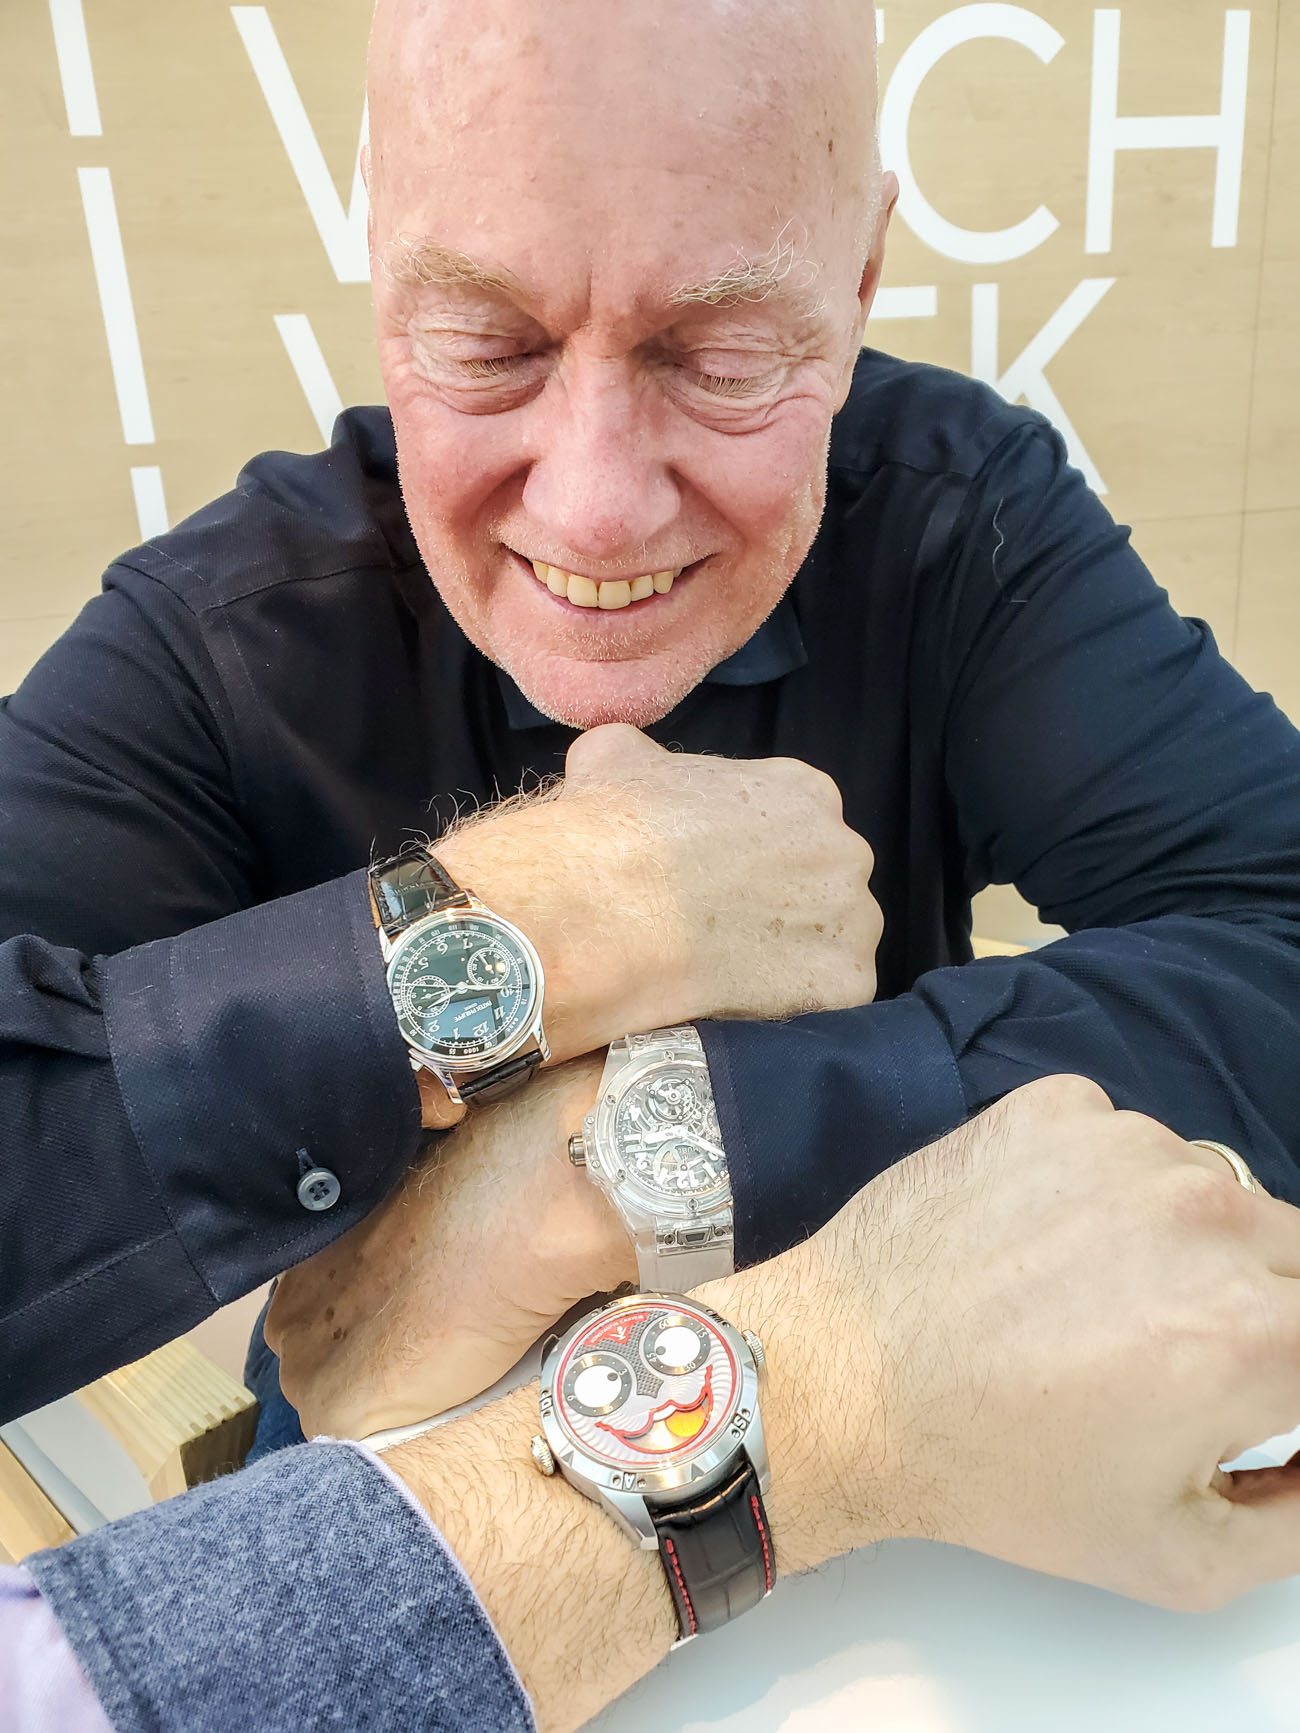 The Life and Times of Jean-Claude Biver, a Swiss Watch Legend - Bloomberg